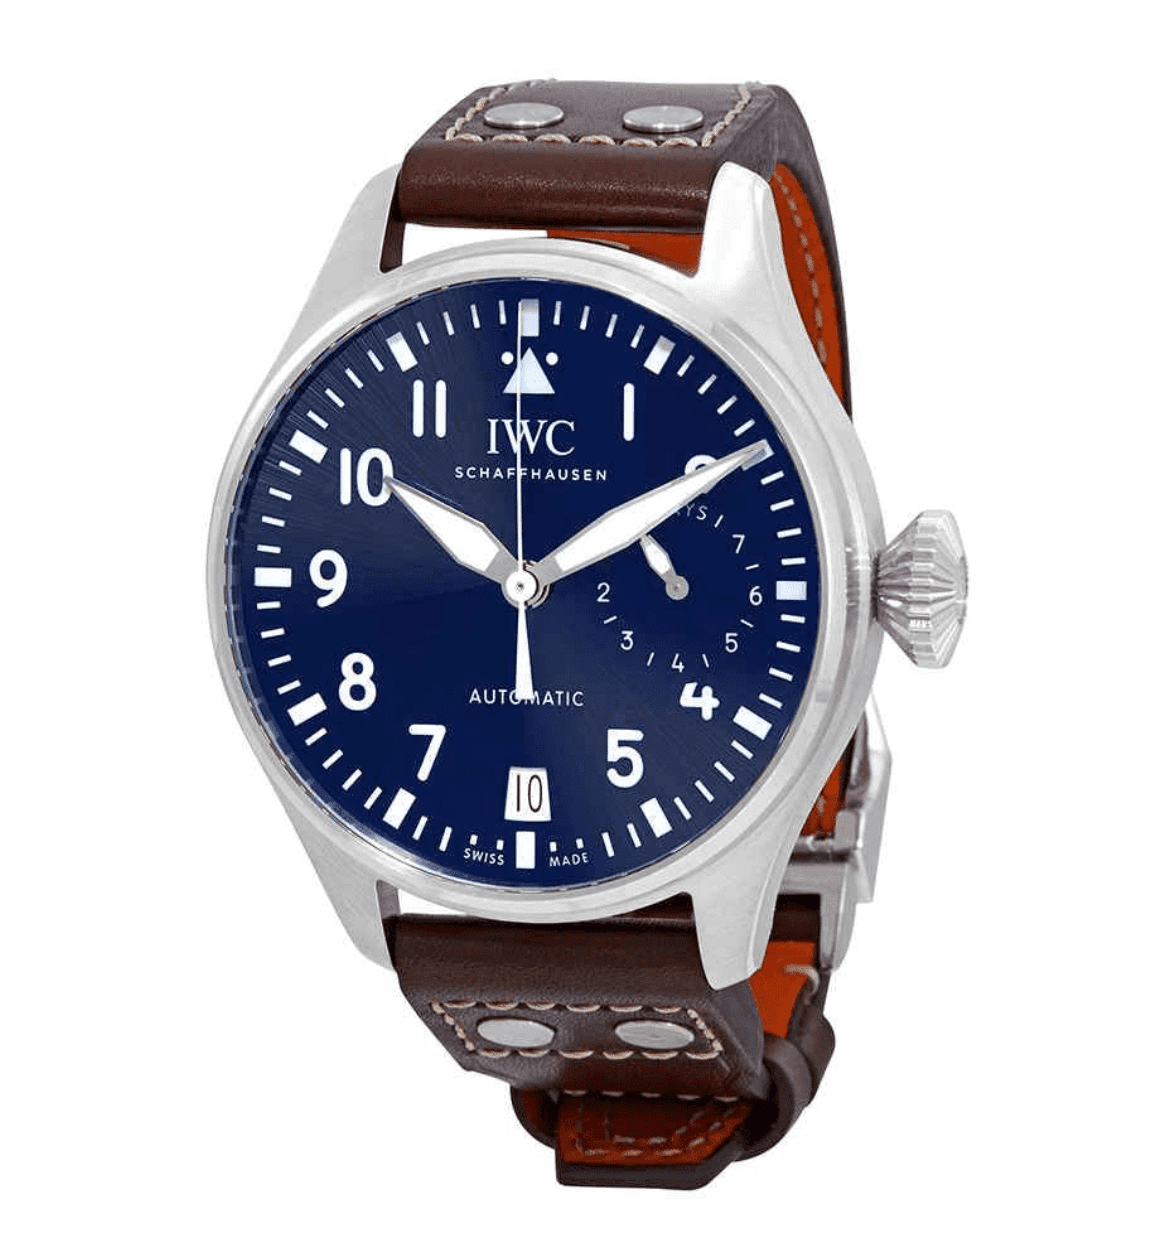 IWC "Le Petit Prince" Big Pilot IW501002 Screw Down Crown, Beautiful Blue Dial, 8 Day Power Reserve, Brown Leather Strap with deployment clasp, Front View white